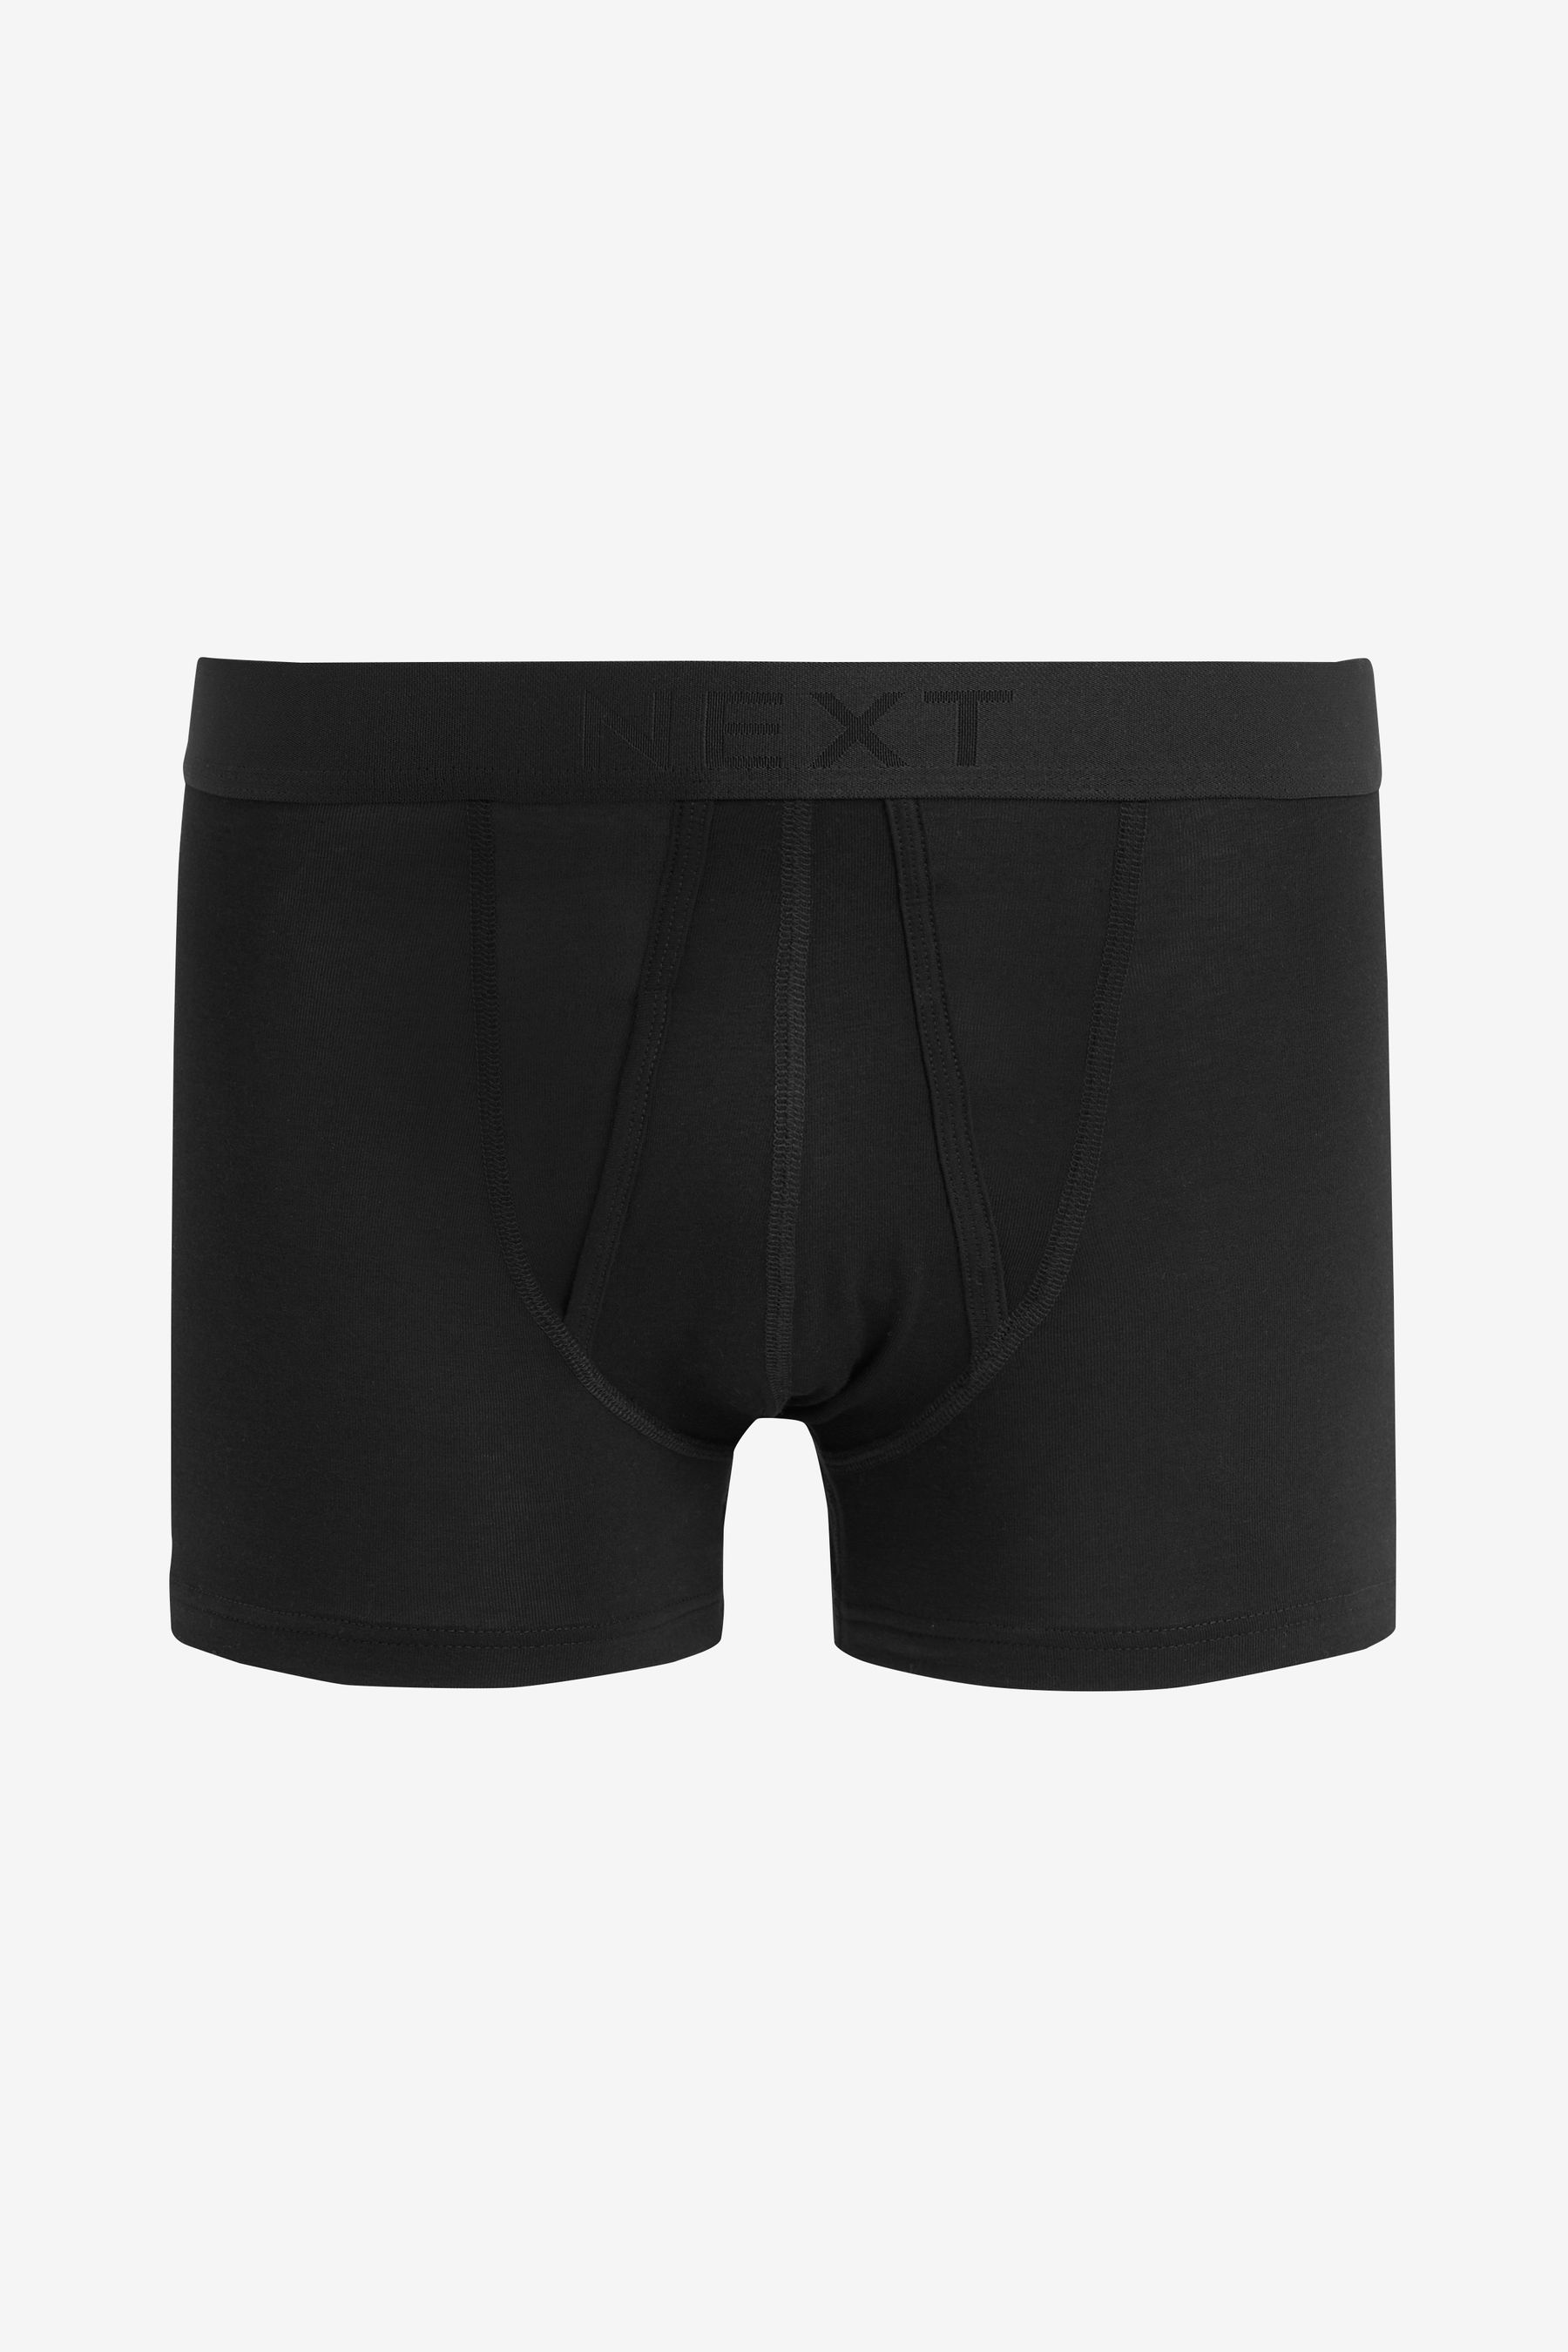 Buy Black Bamboo Signature A-Front Boxers 4 Pack from the Next UK ...